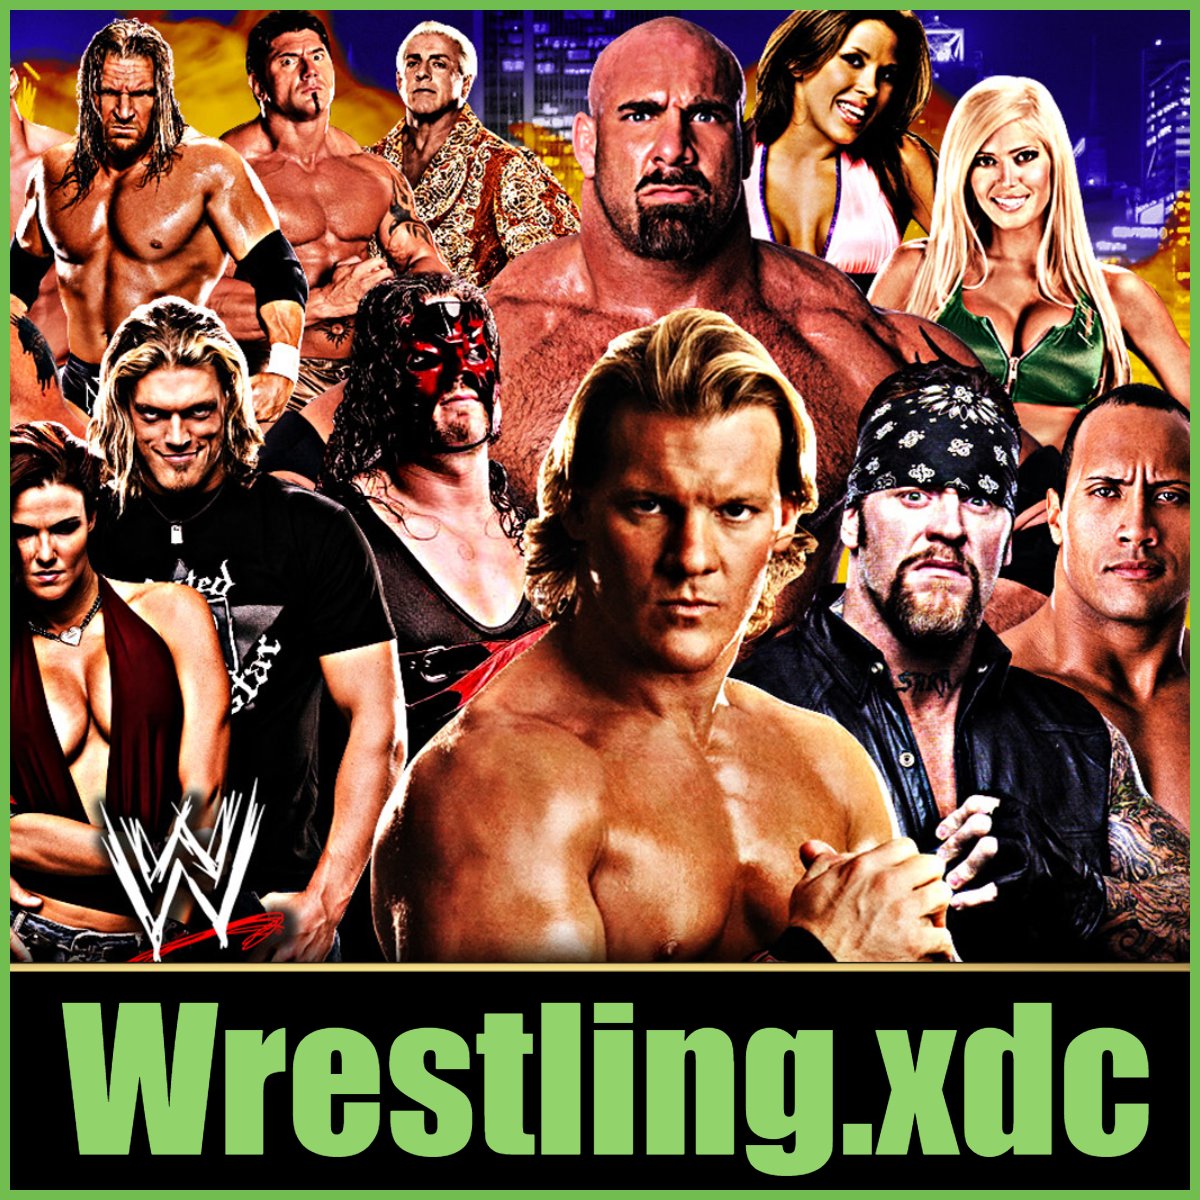 Check out this NFT! xdsea.com/nft/xdc85d216d… #XDSea #BuildItOnXDC #XDC #XDCdomains #nft #nfts #NFTCommunity #domains #domainnames #Crypto #cryptocurrency #NFTGiveaways #NFTCollections #wrestling #WWE #WWERaw #FreestyleWrestling #WrestlingTwitter #RAW #WrestlingGames #ProWrestling